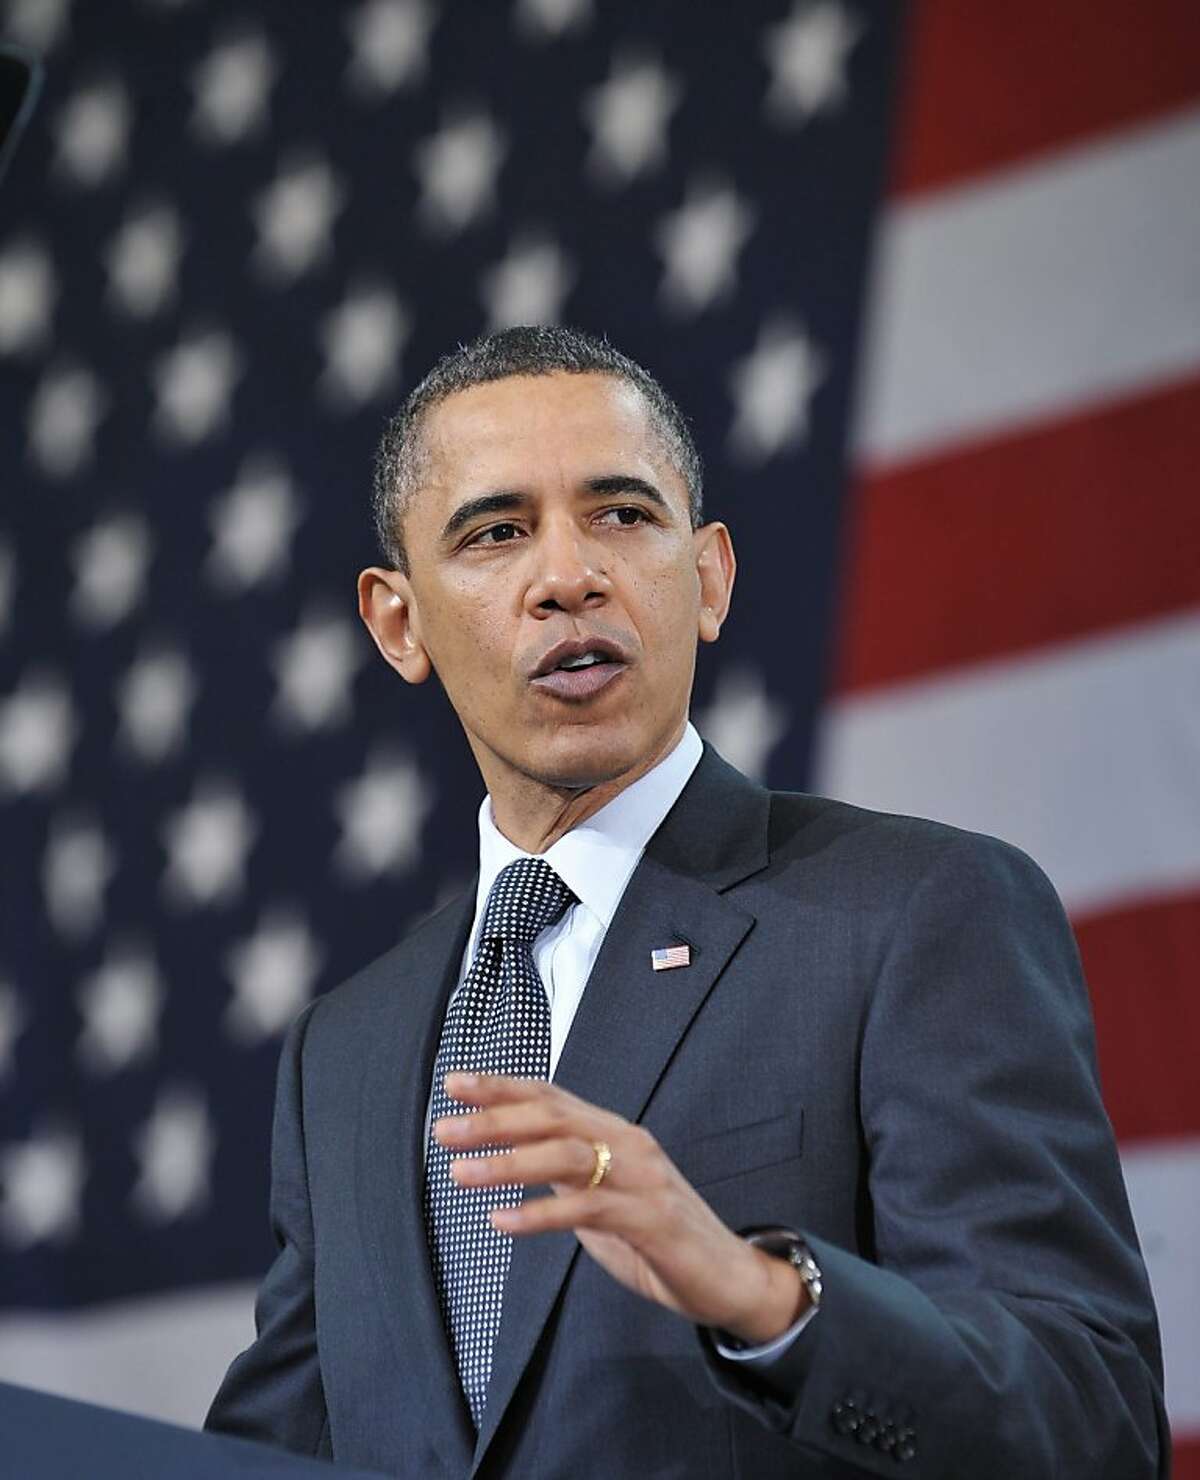 US President Barack Obama speaks during a town hall meeting April 6, 2011 in Fairless Hills, Pennsylvania. The White House on Wednesday said that around 800,000 federal employees would be told not to go work and military personnel would miss paychecks ifa budget row causes a government shutdown.